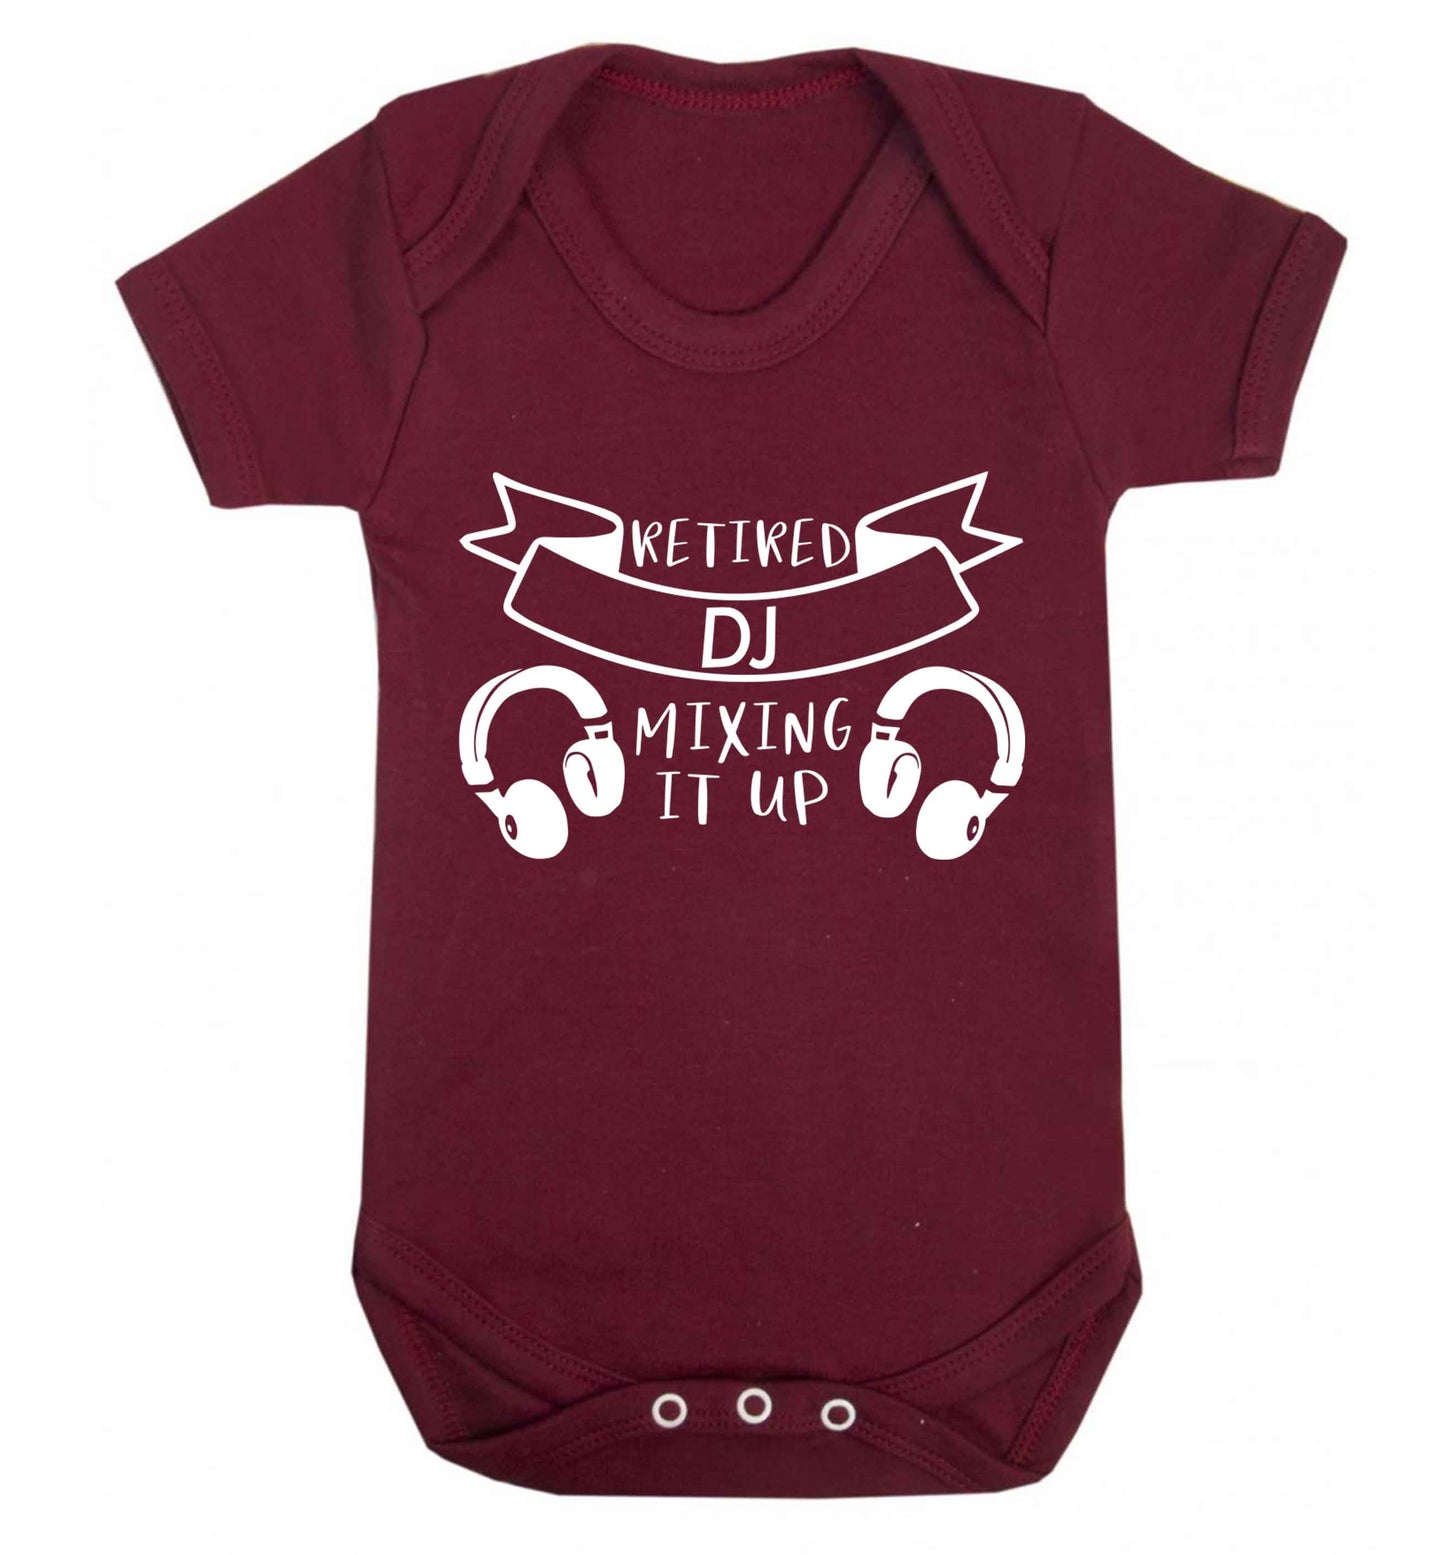 Retired DJ mixing it up Baby Vest maroon 18-24 months